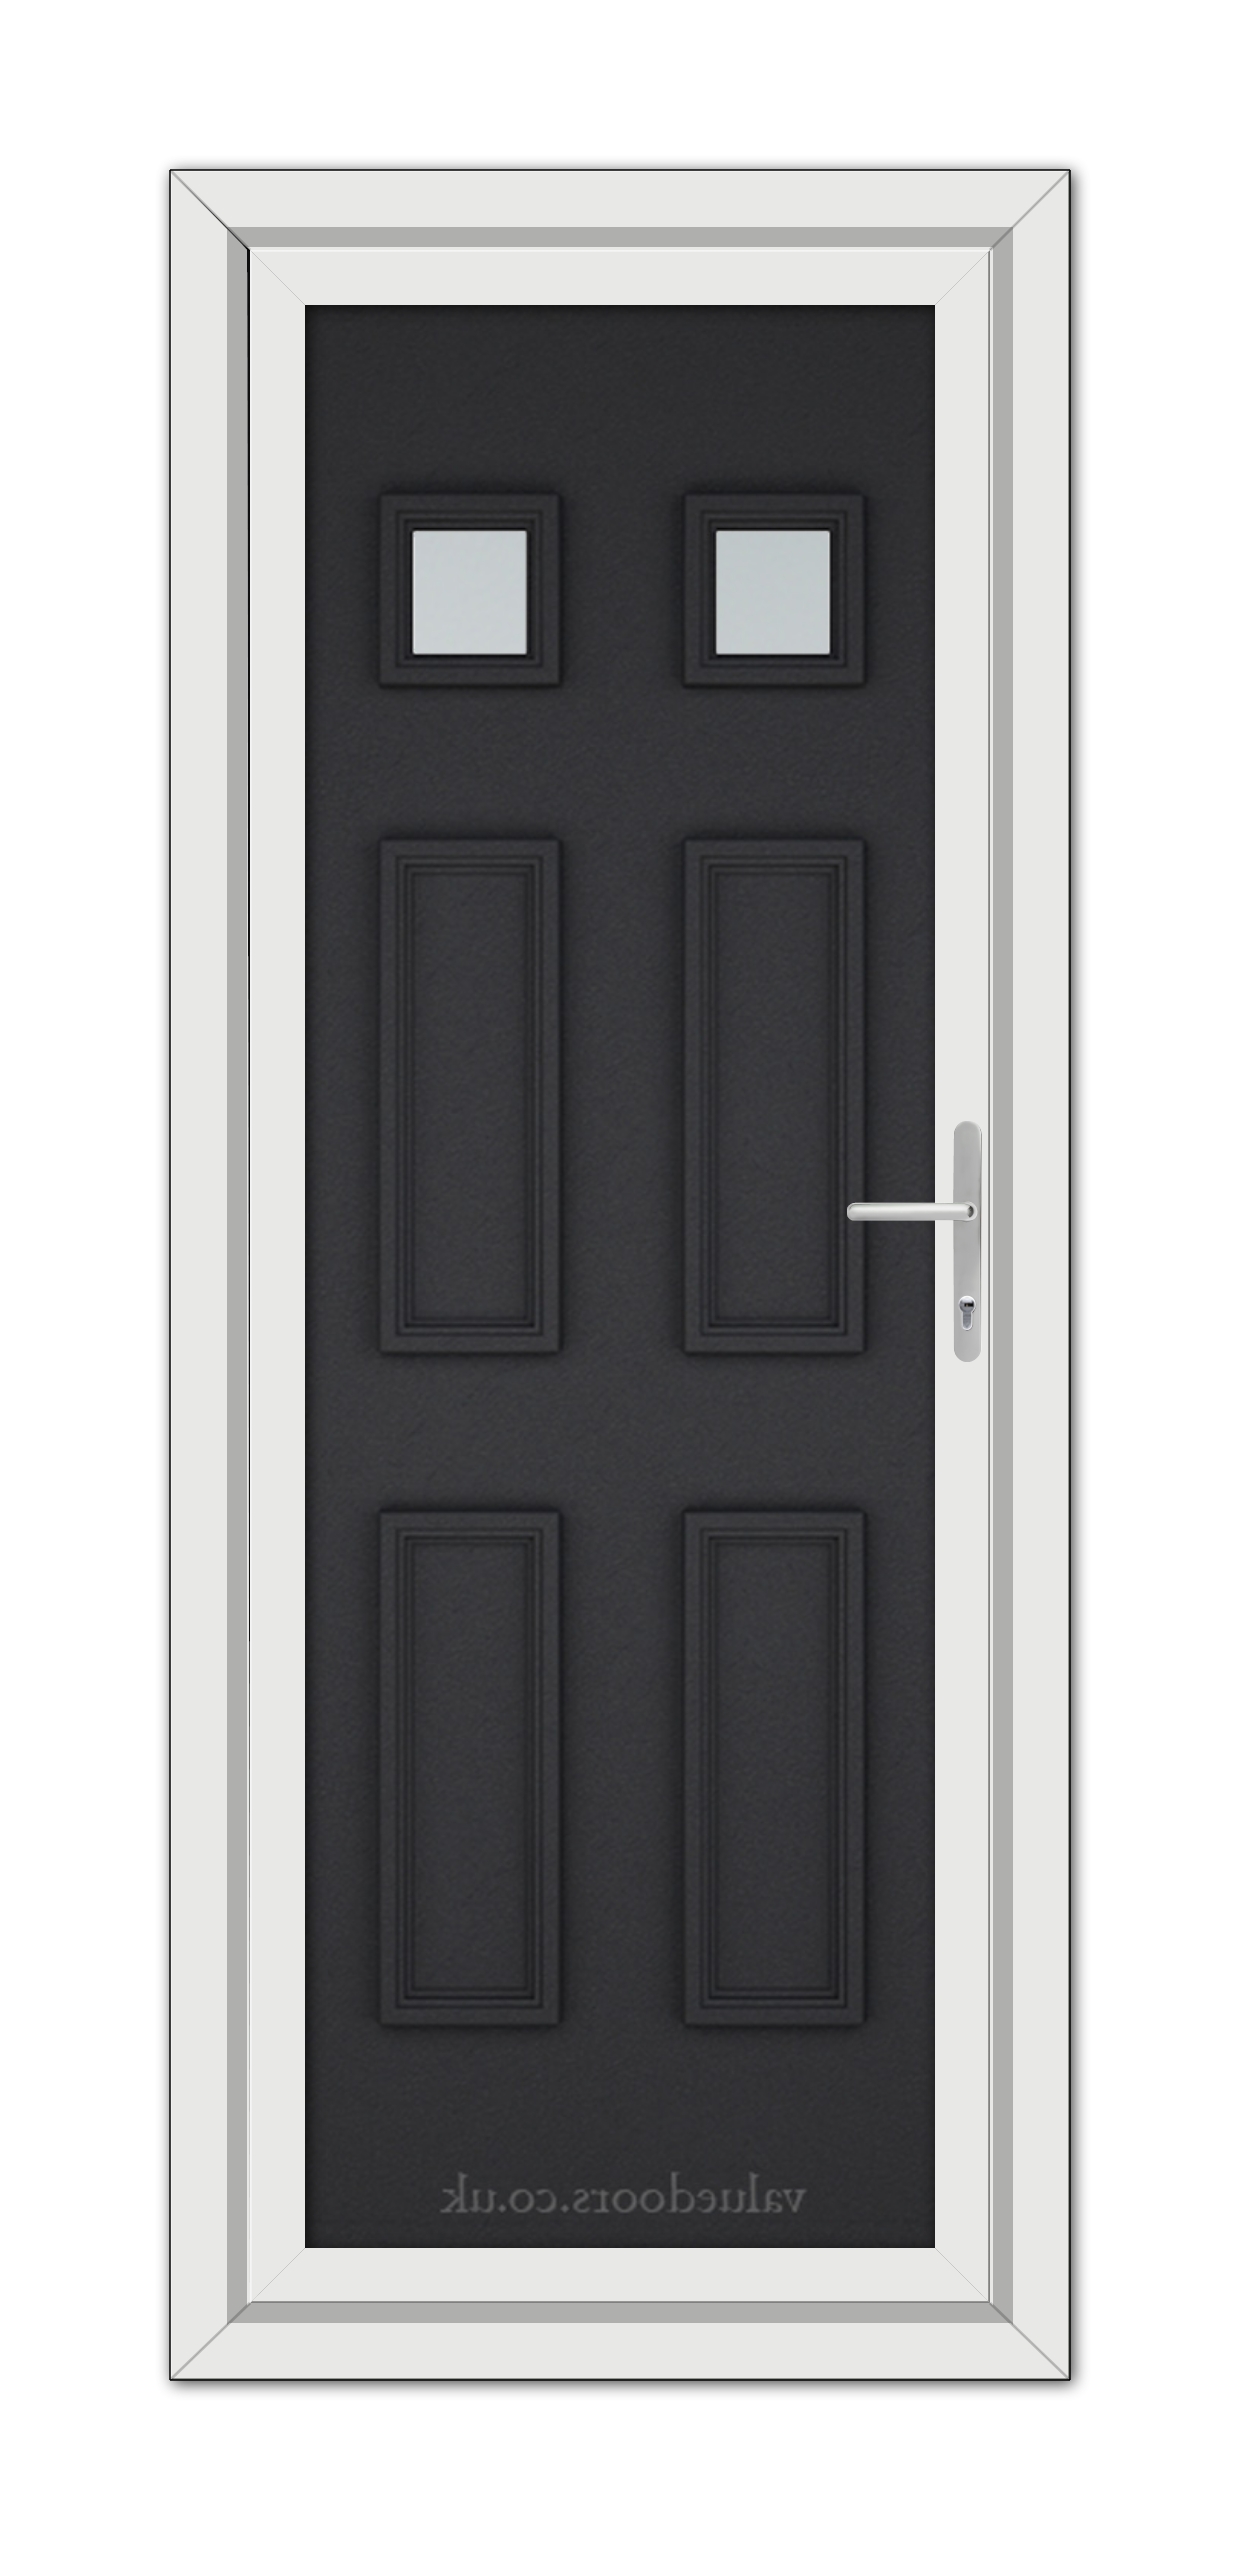 A modern Black Brown Windsor uPVC Door with two small square windows near the top, set within a white door frame.